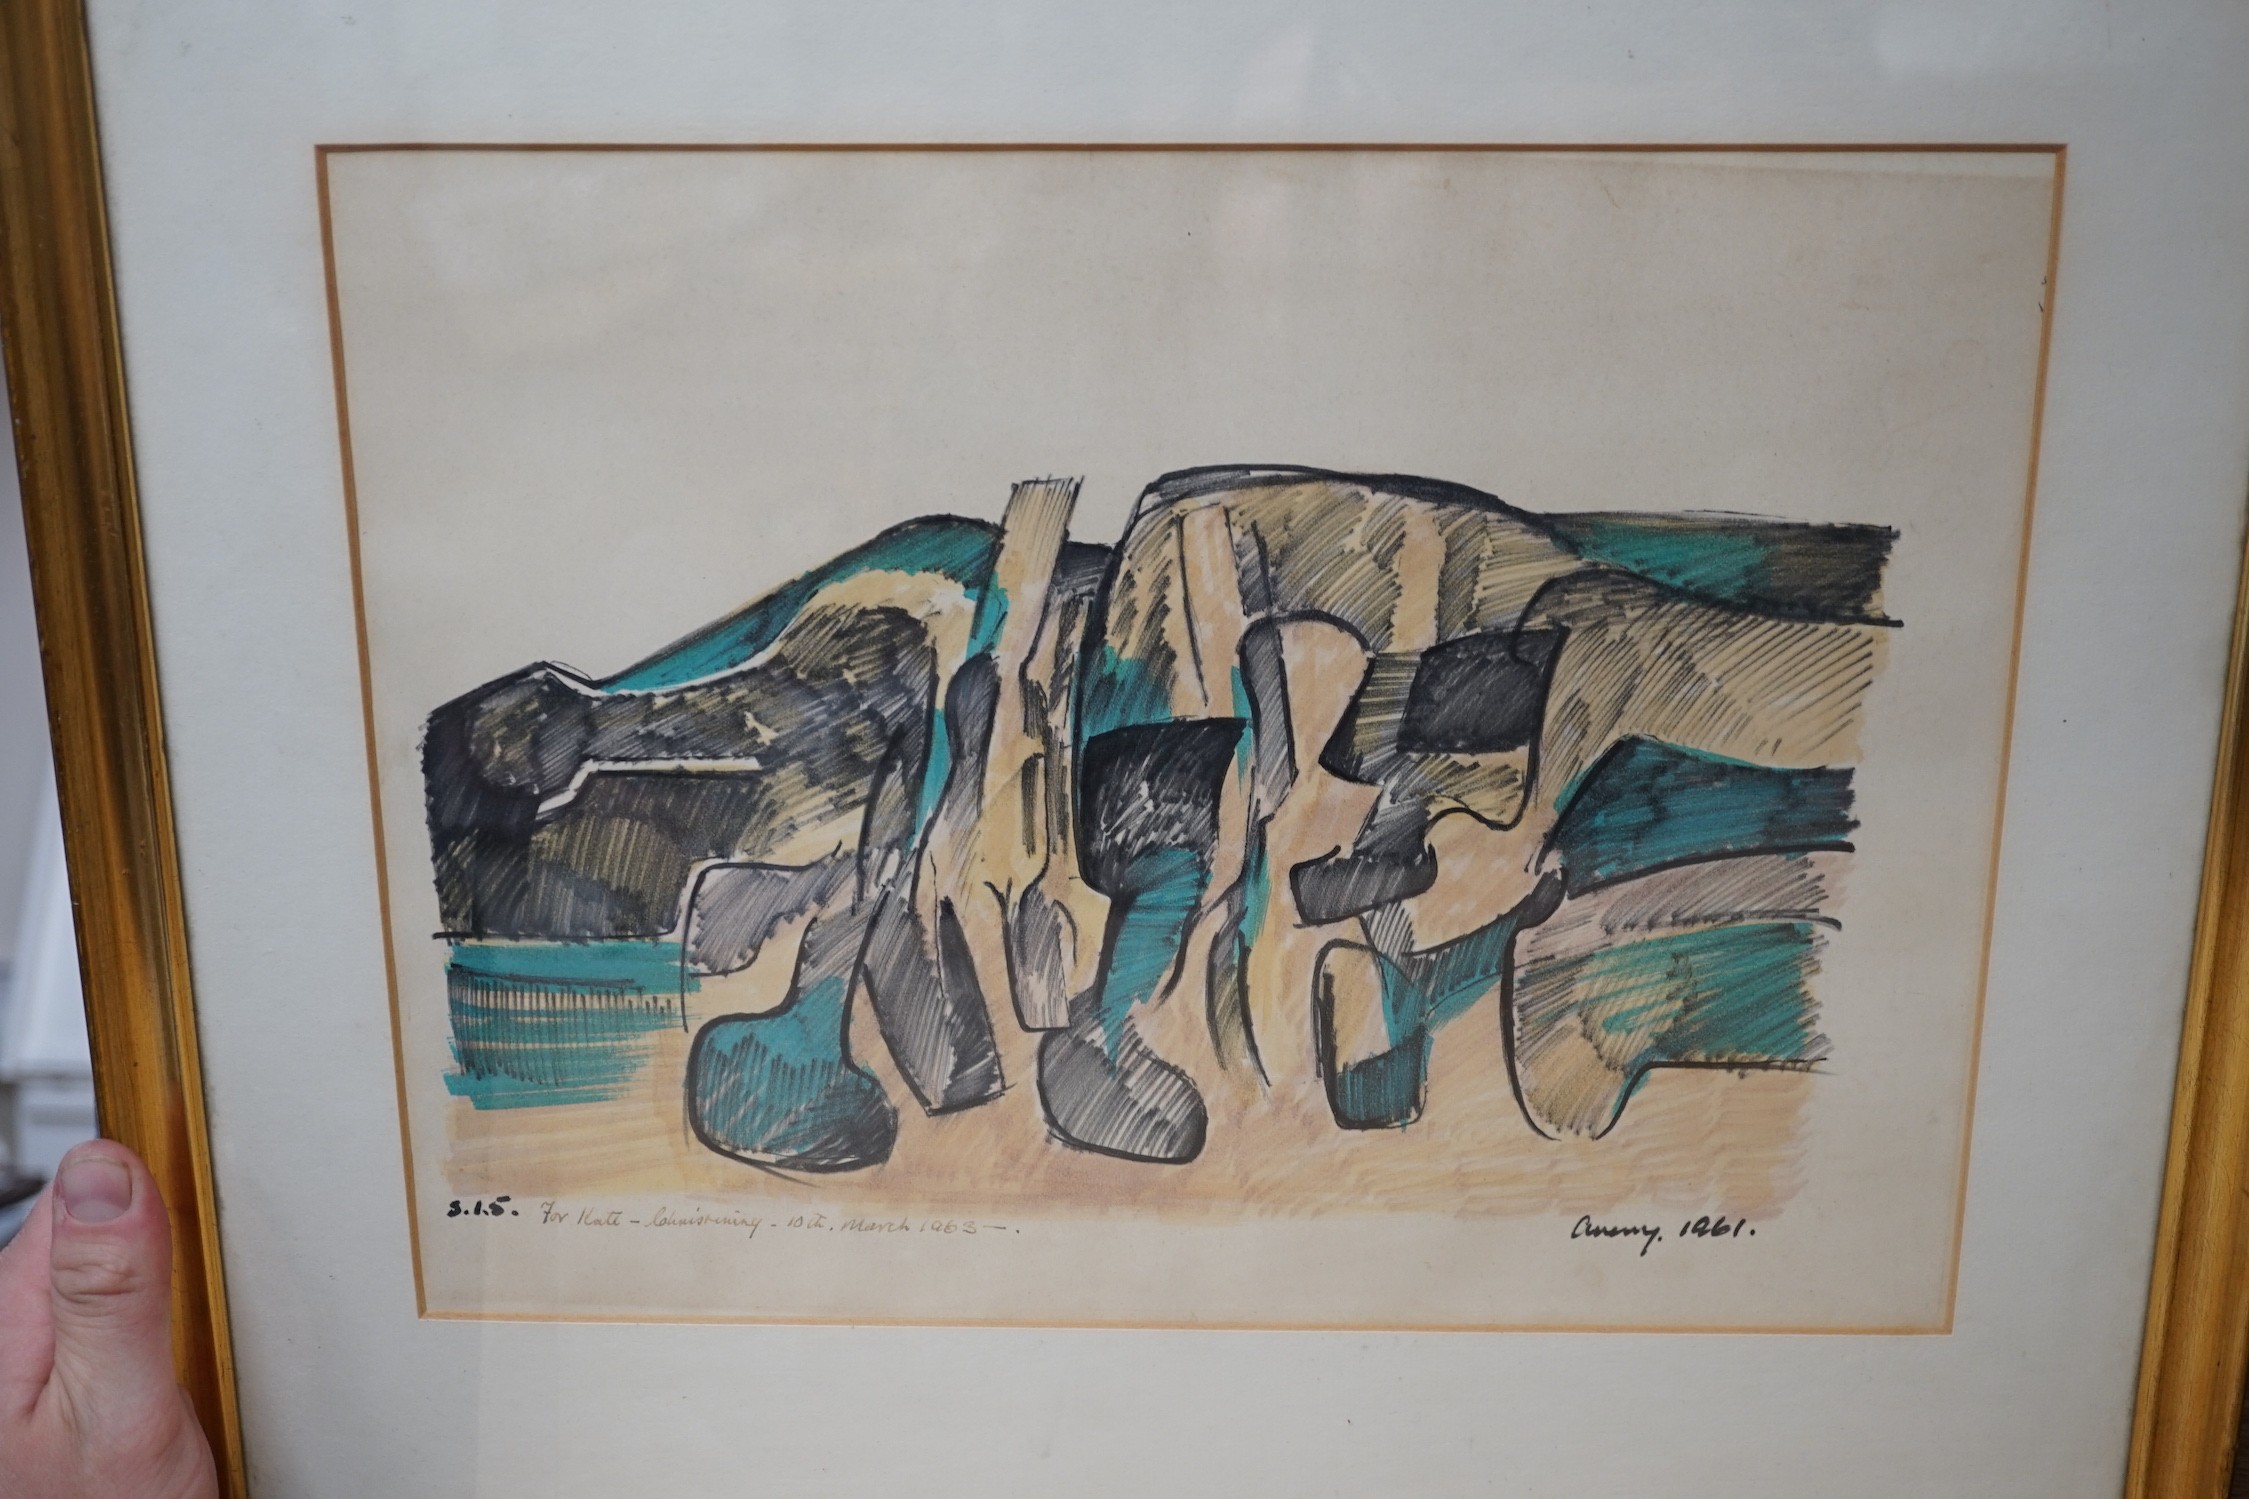 Wilfred Avery (1926-2016), mixed media, Stylised landscape, signed and dated 1961, 26 x 35cm and a similar monochrome landscape, 27 x 36cm